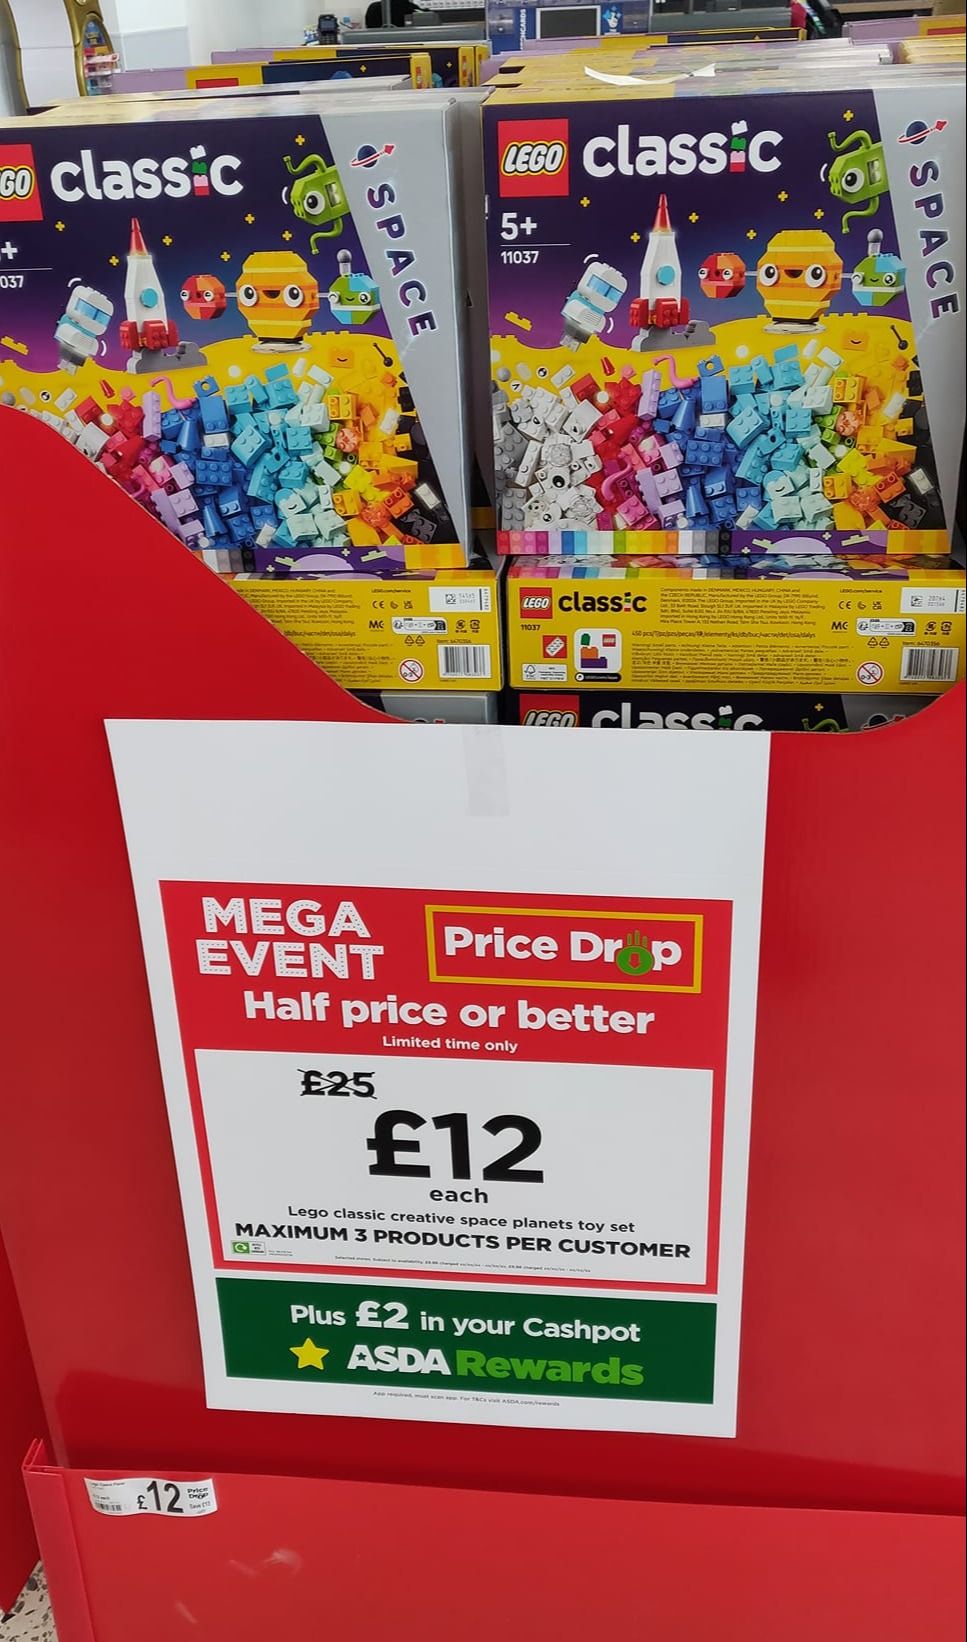 Asda are paying savvy shoppers to stock up on less than half price LEGO which is perfect for early Christmas hauls